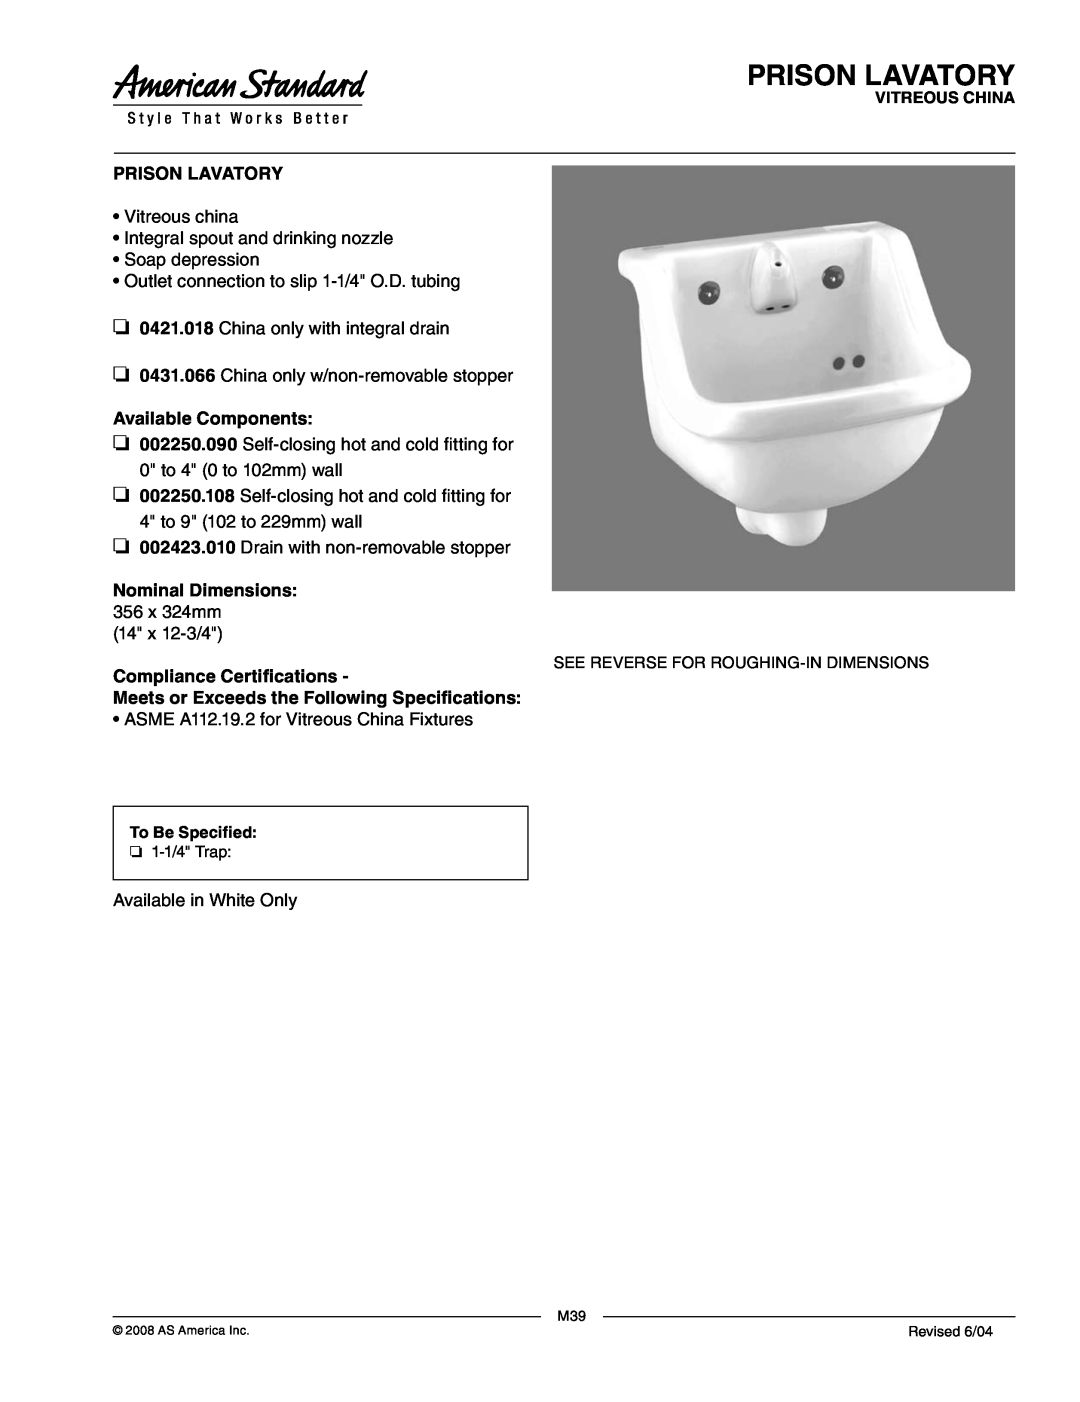 American Standard 0421.018, 0431.066 dimensions Prison Lavatory, Available Components, Nominal Dimensions 356 x 324mm 